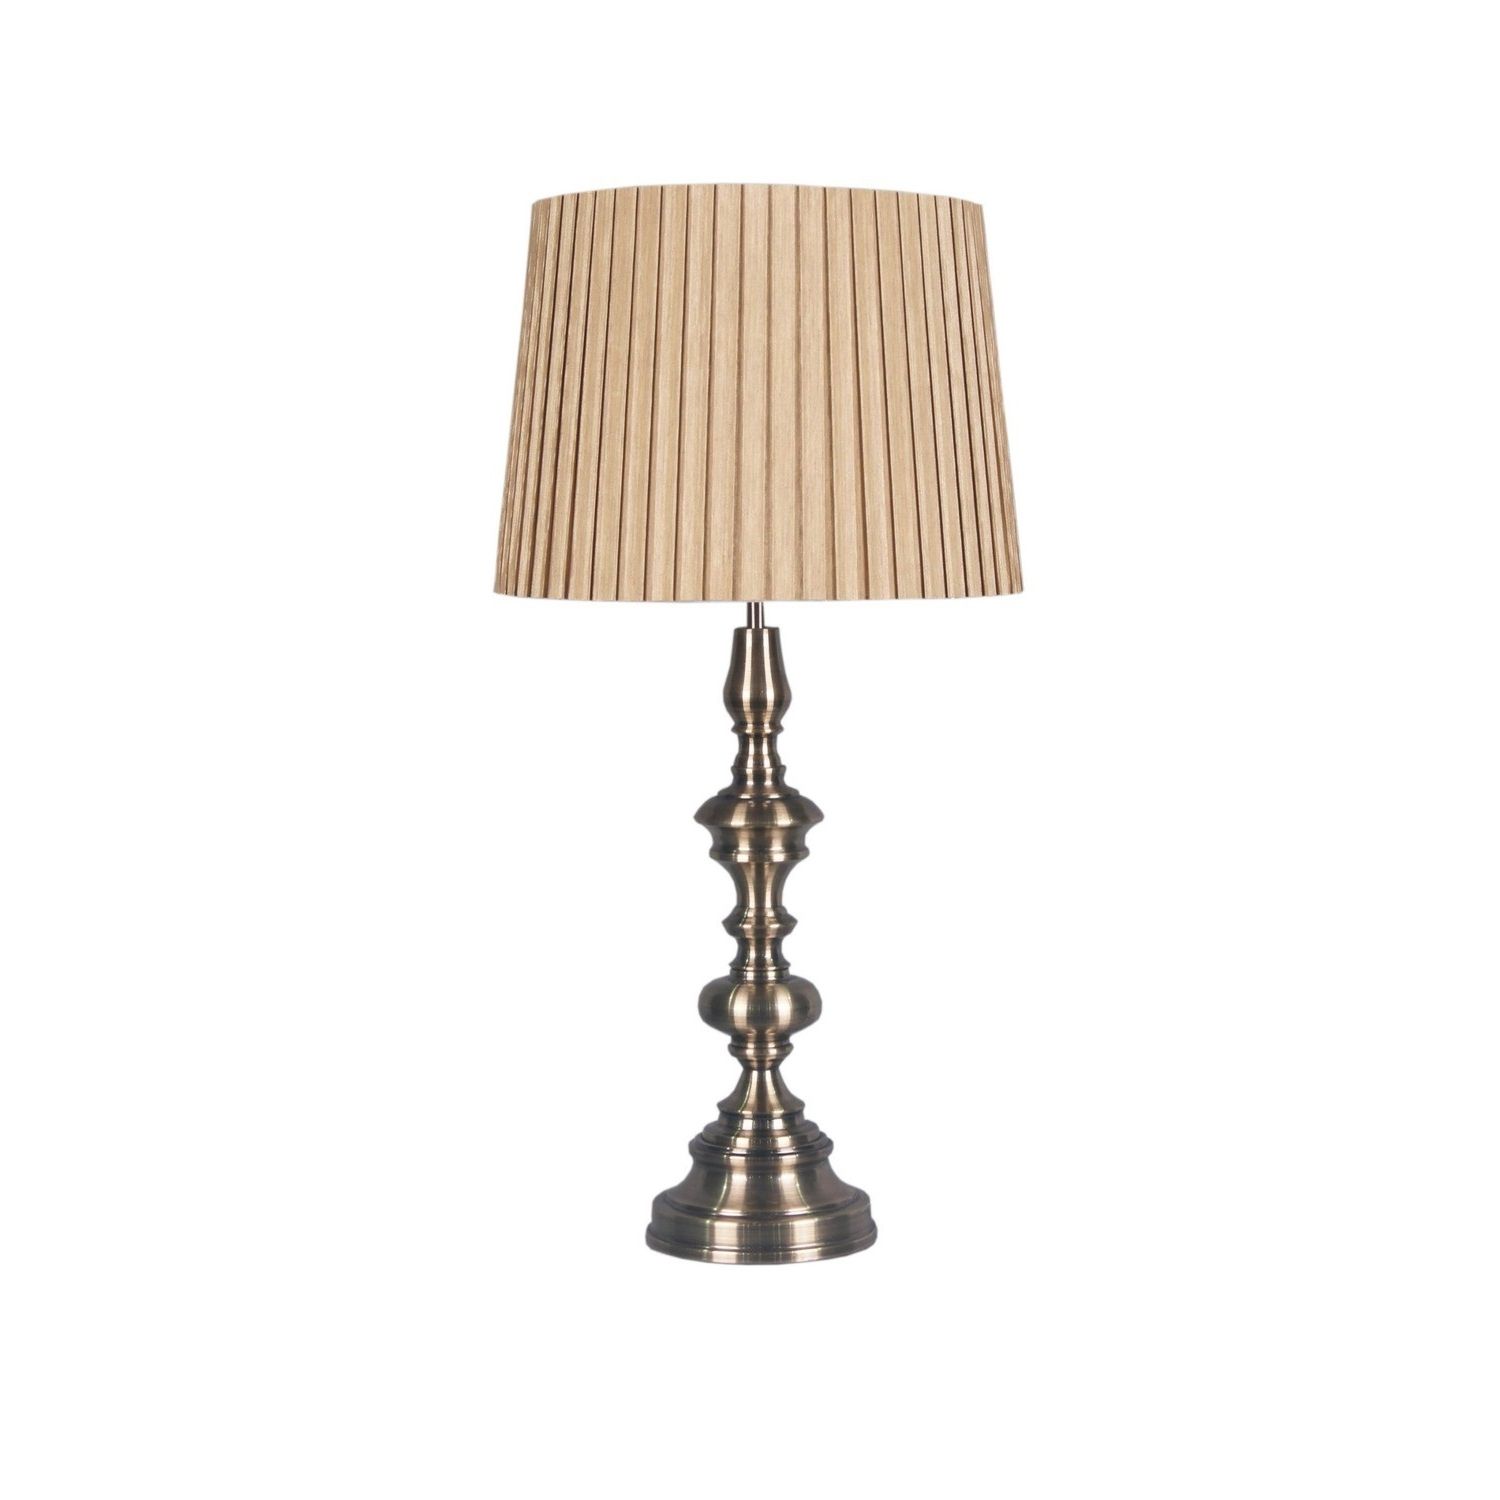 Most Recent John Lewis Table Lamps For Living Room With Light : Tiffany Table Lamp Shade Replacements Floor Shades Only John (View 13 of 15)